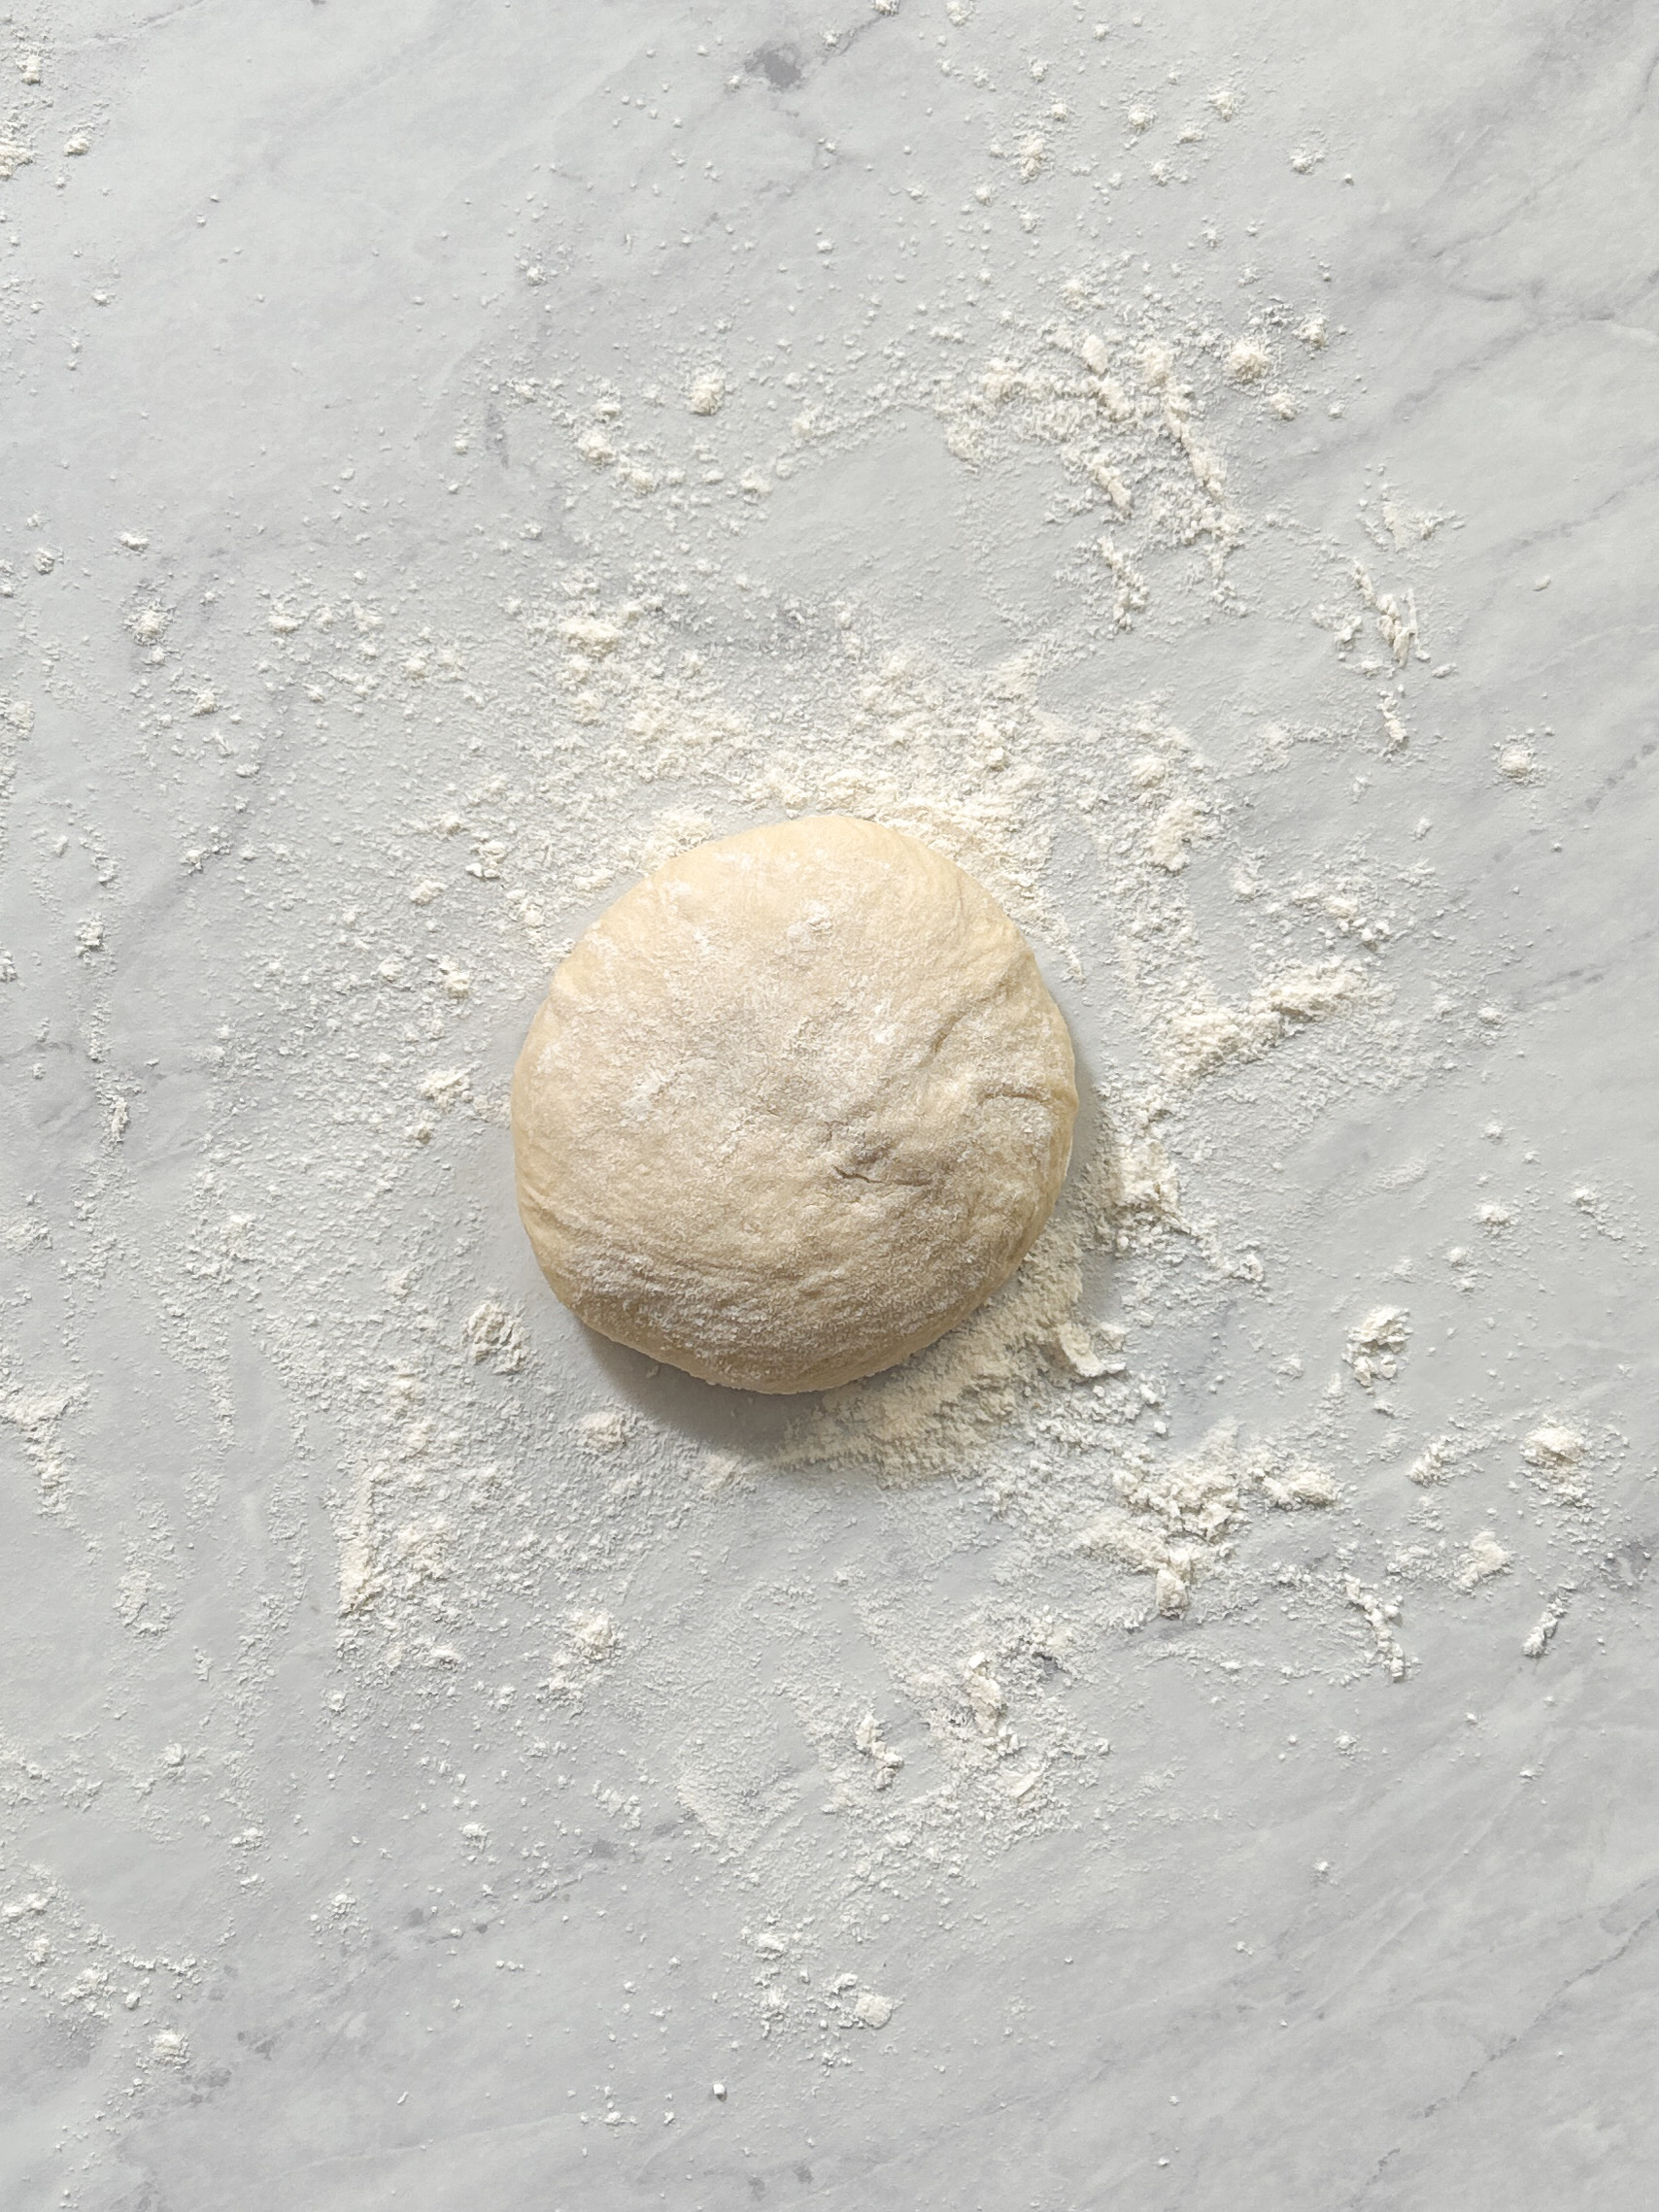 pizza dough rolled into a ball on a lightly floured surface